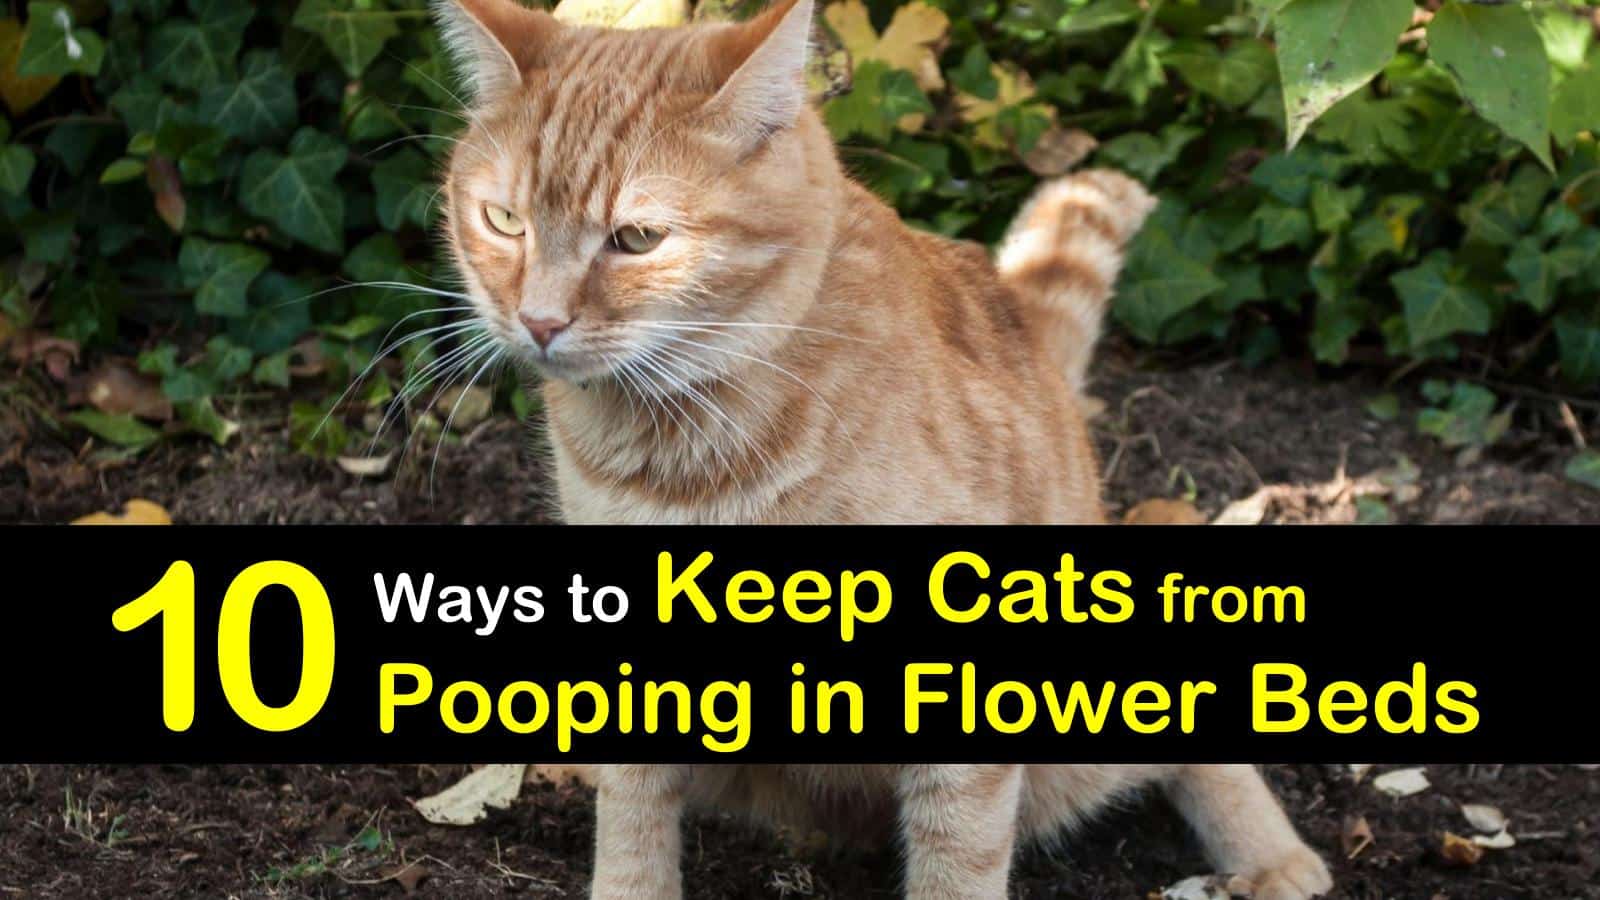 how to keep cats from pooping in flower beds titleimg1